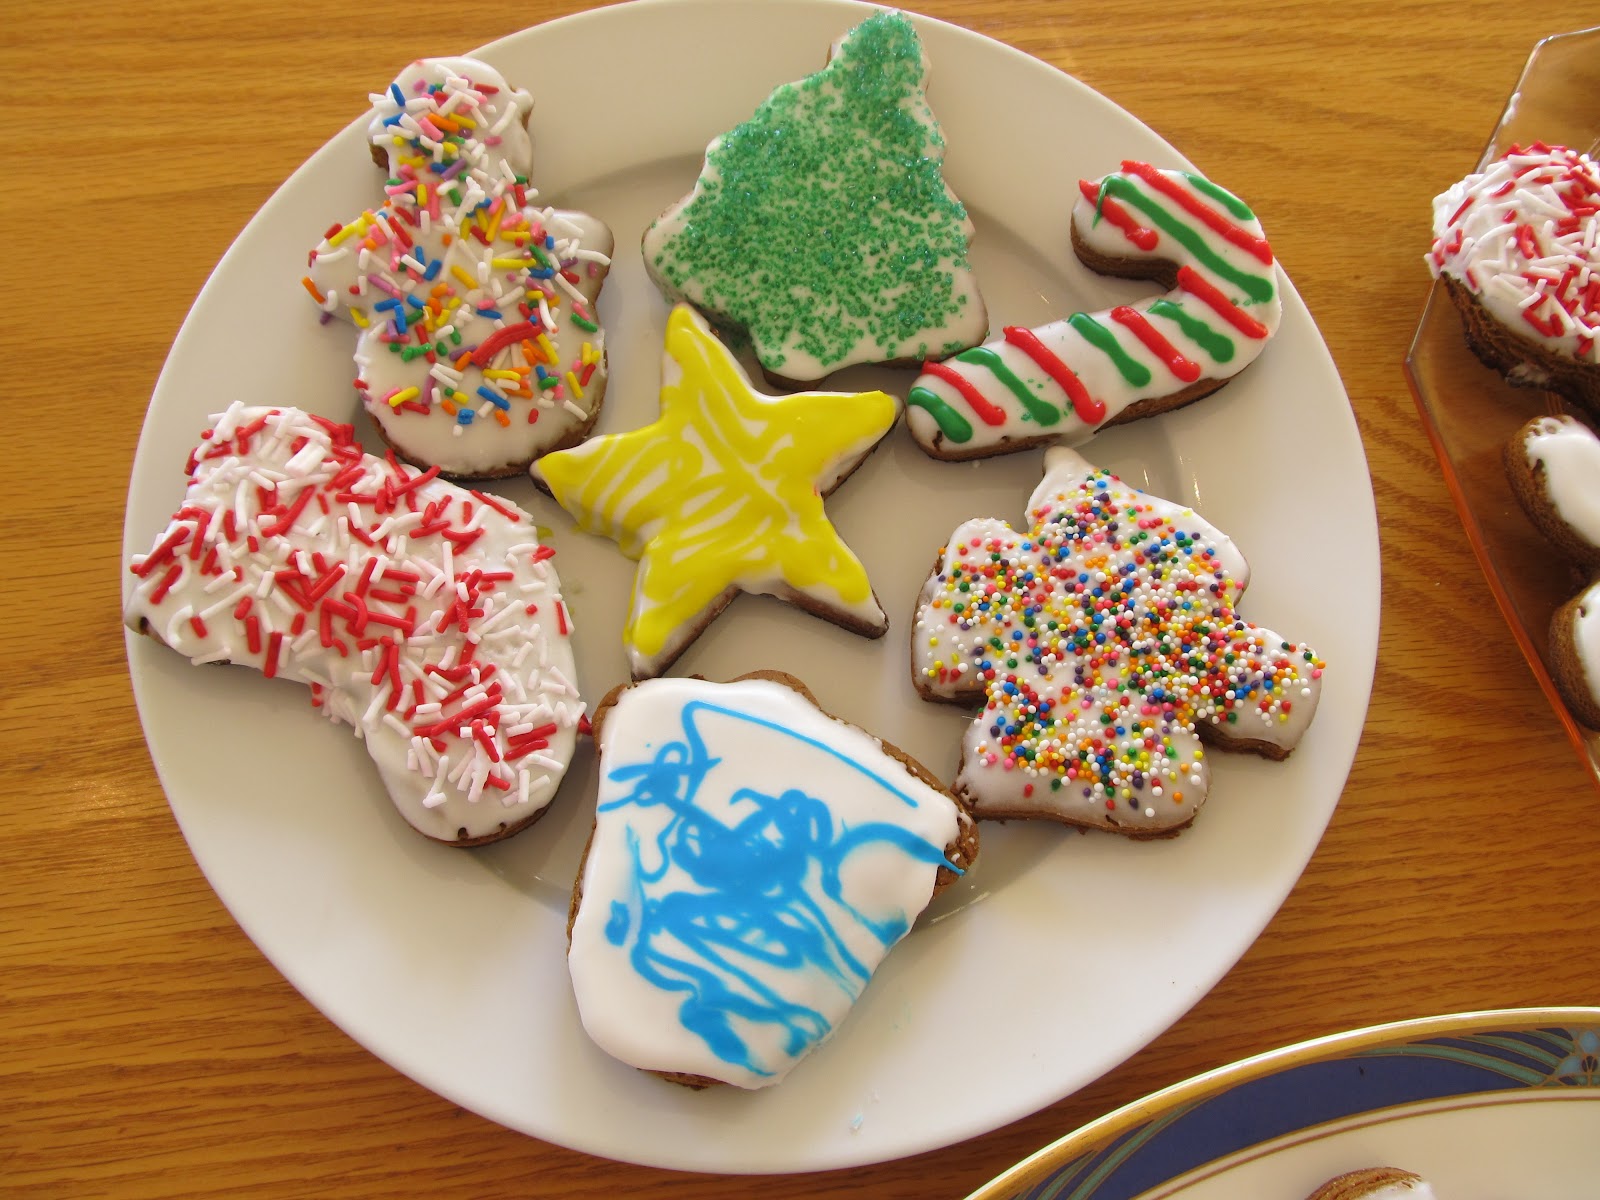 High Park Home Daycare: Royal Icing Makes Kids Cookie Decorating Easy